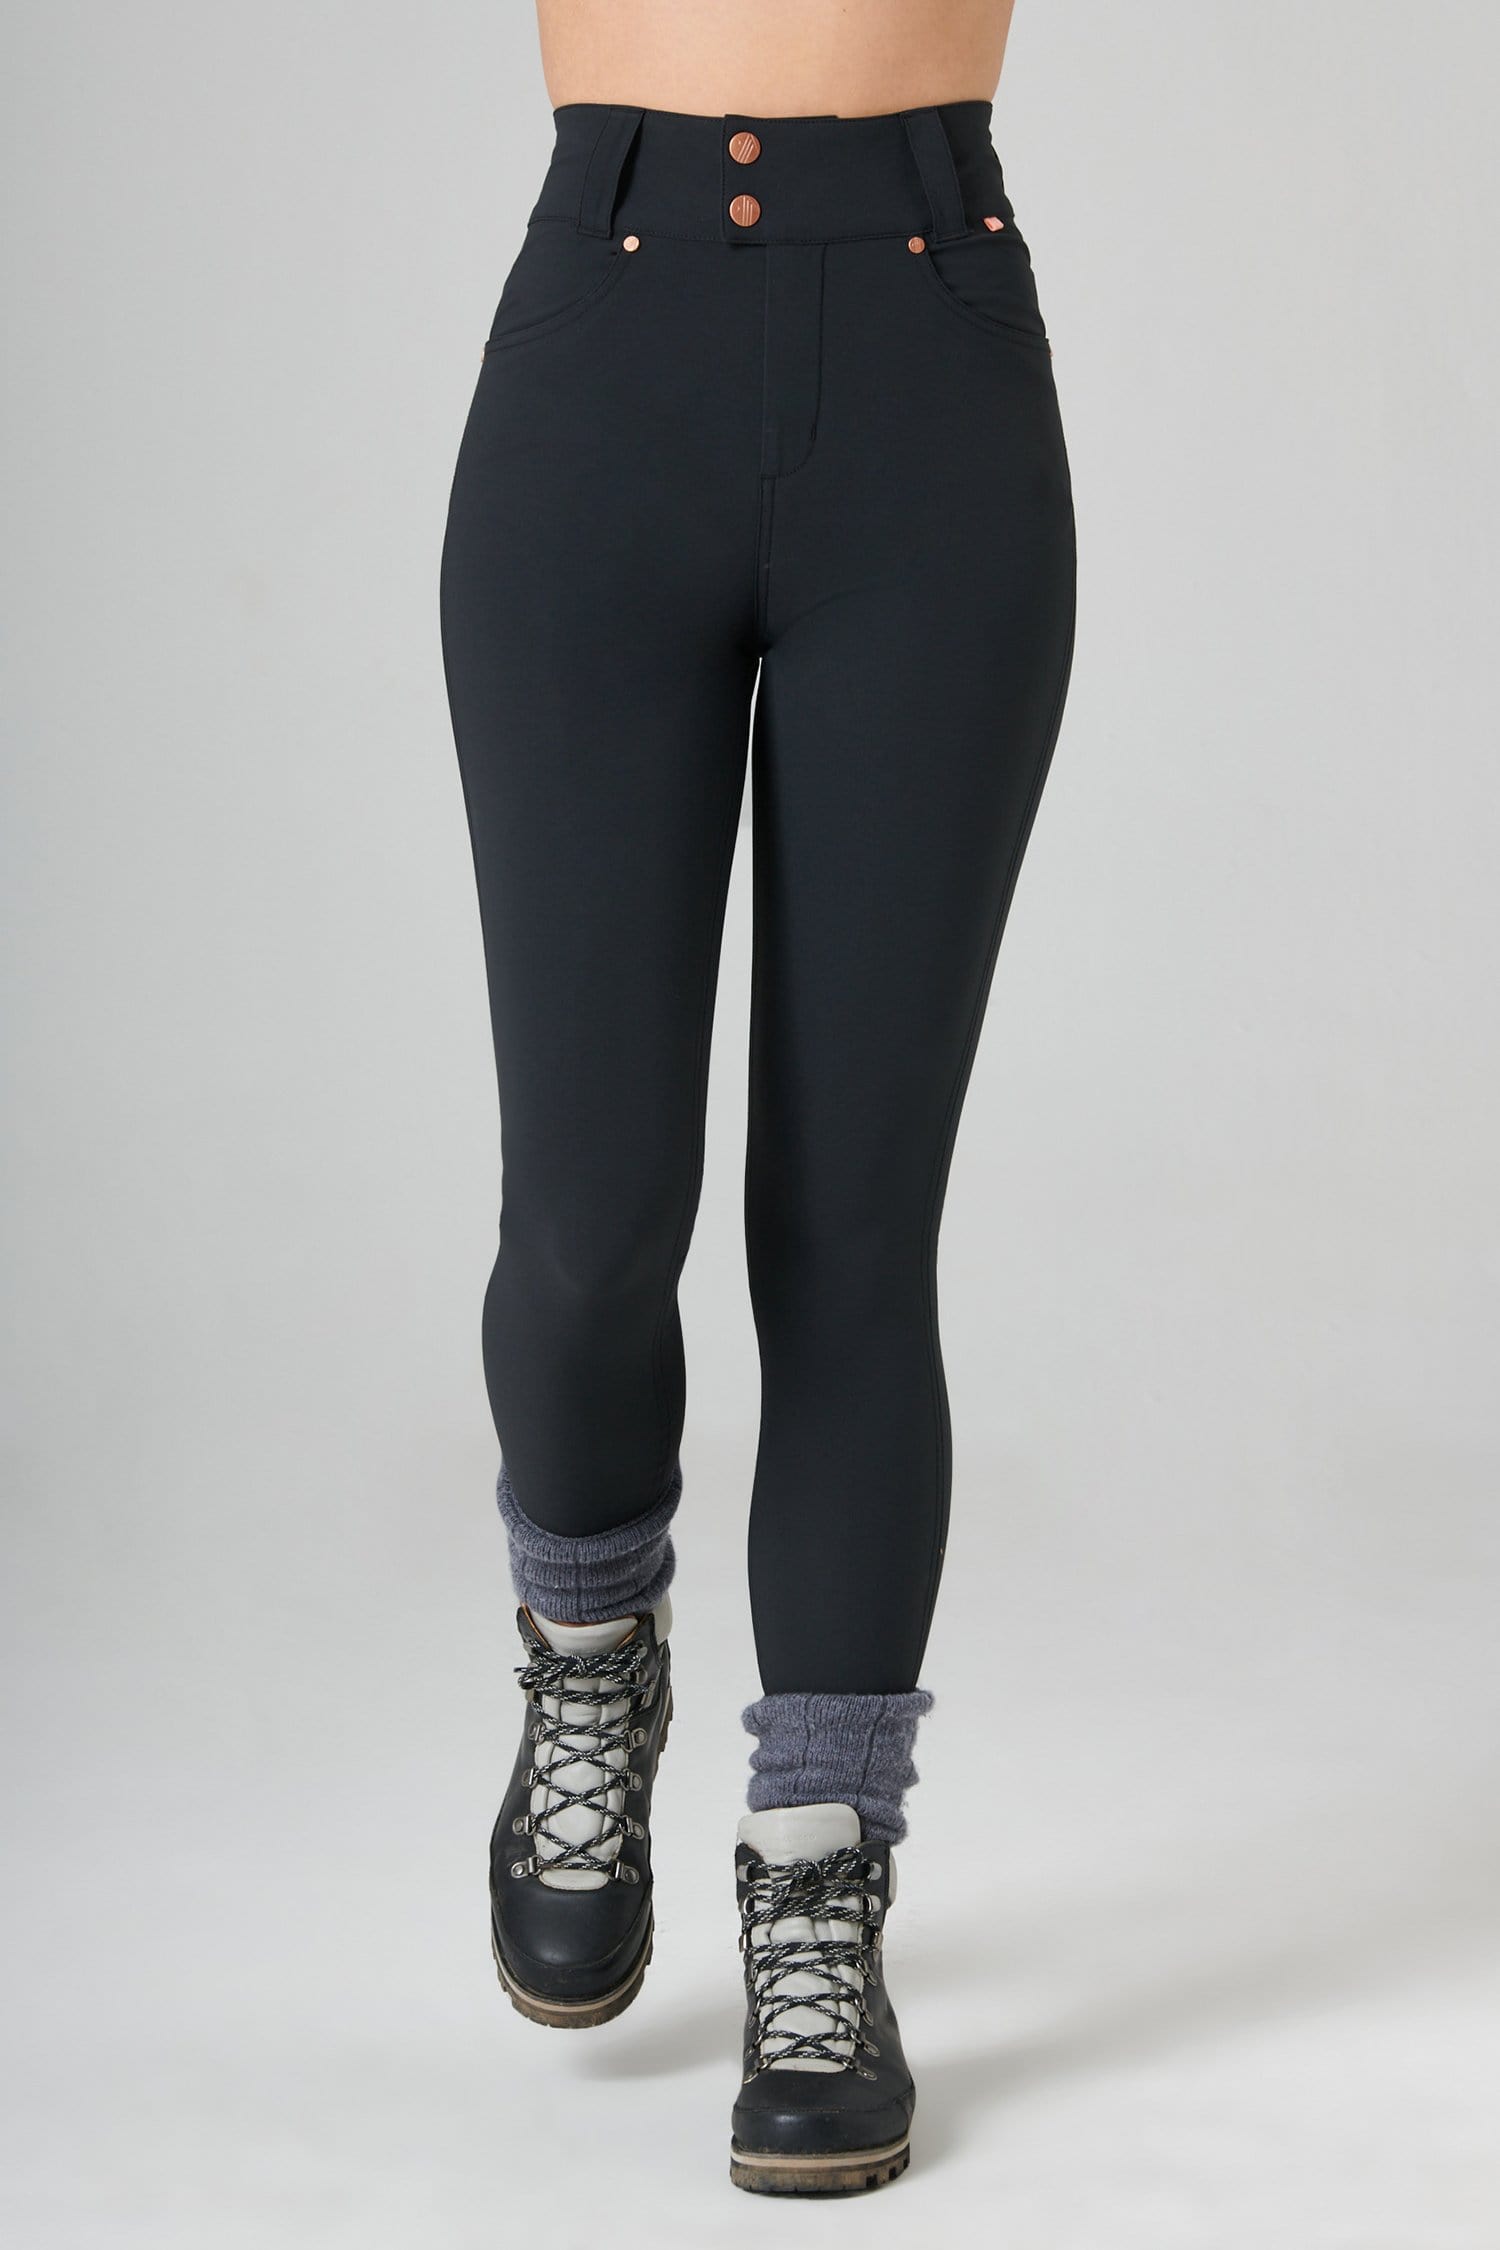 The Shape Skinny Outdoor Trousers - Black - 34r / Uk16 - Womens - Acai Outdoorwear